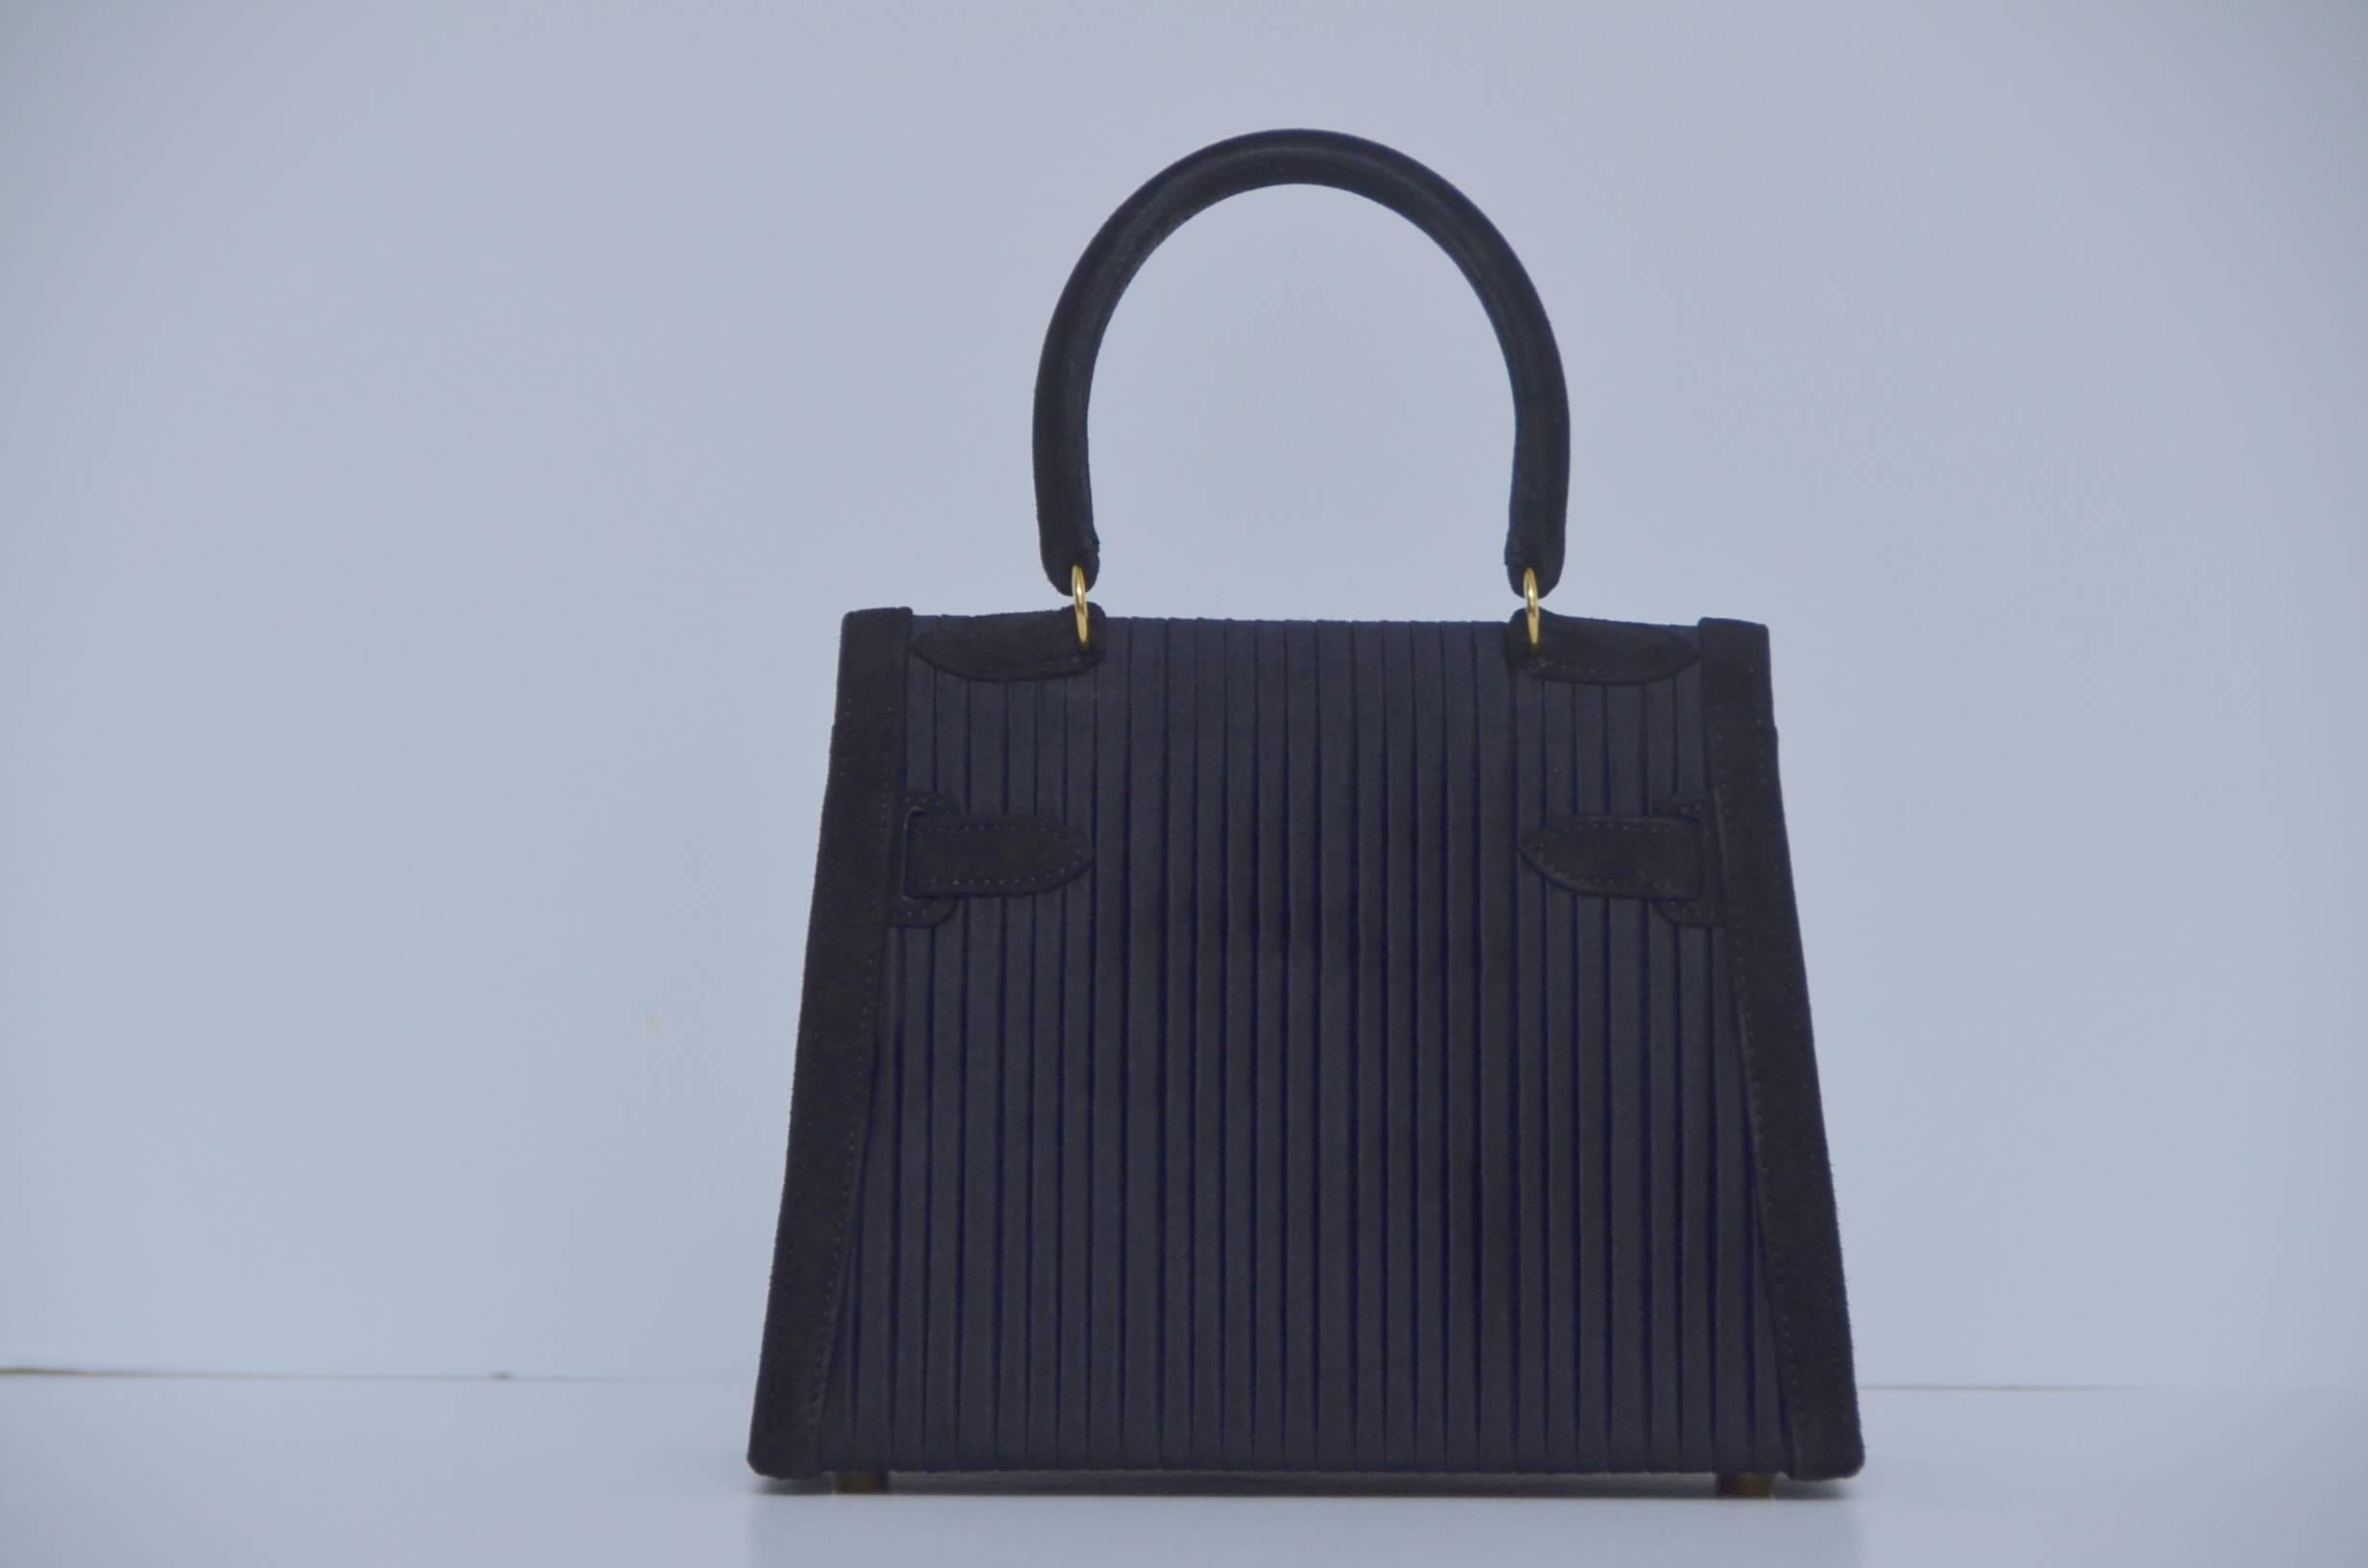 Extremely rare Hermes Mini Kelly bag 20 cm black pleated Satin & Veau Doblis suede leather with gold hardware.
Definitely collector's piece.....
Excellent mint vintage condition.Satin and suede in excellent condition,couple marks inside.Lined in